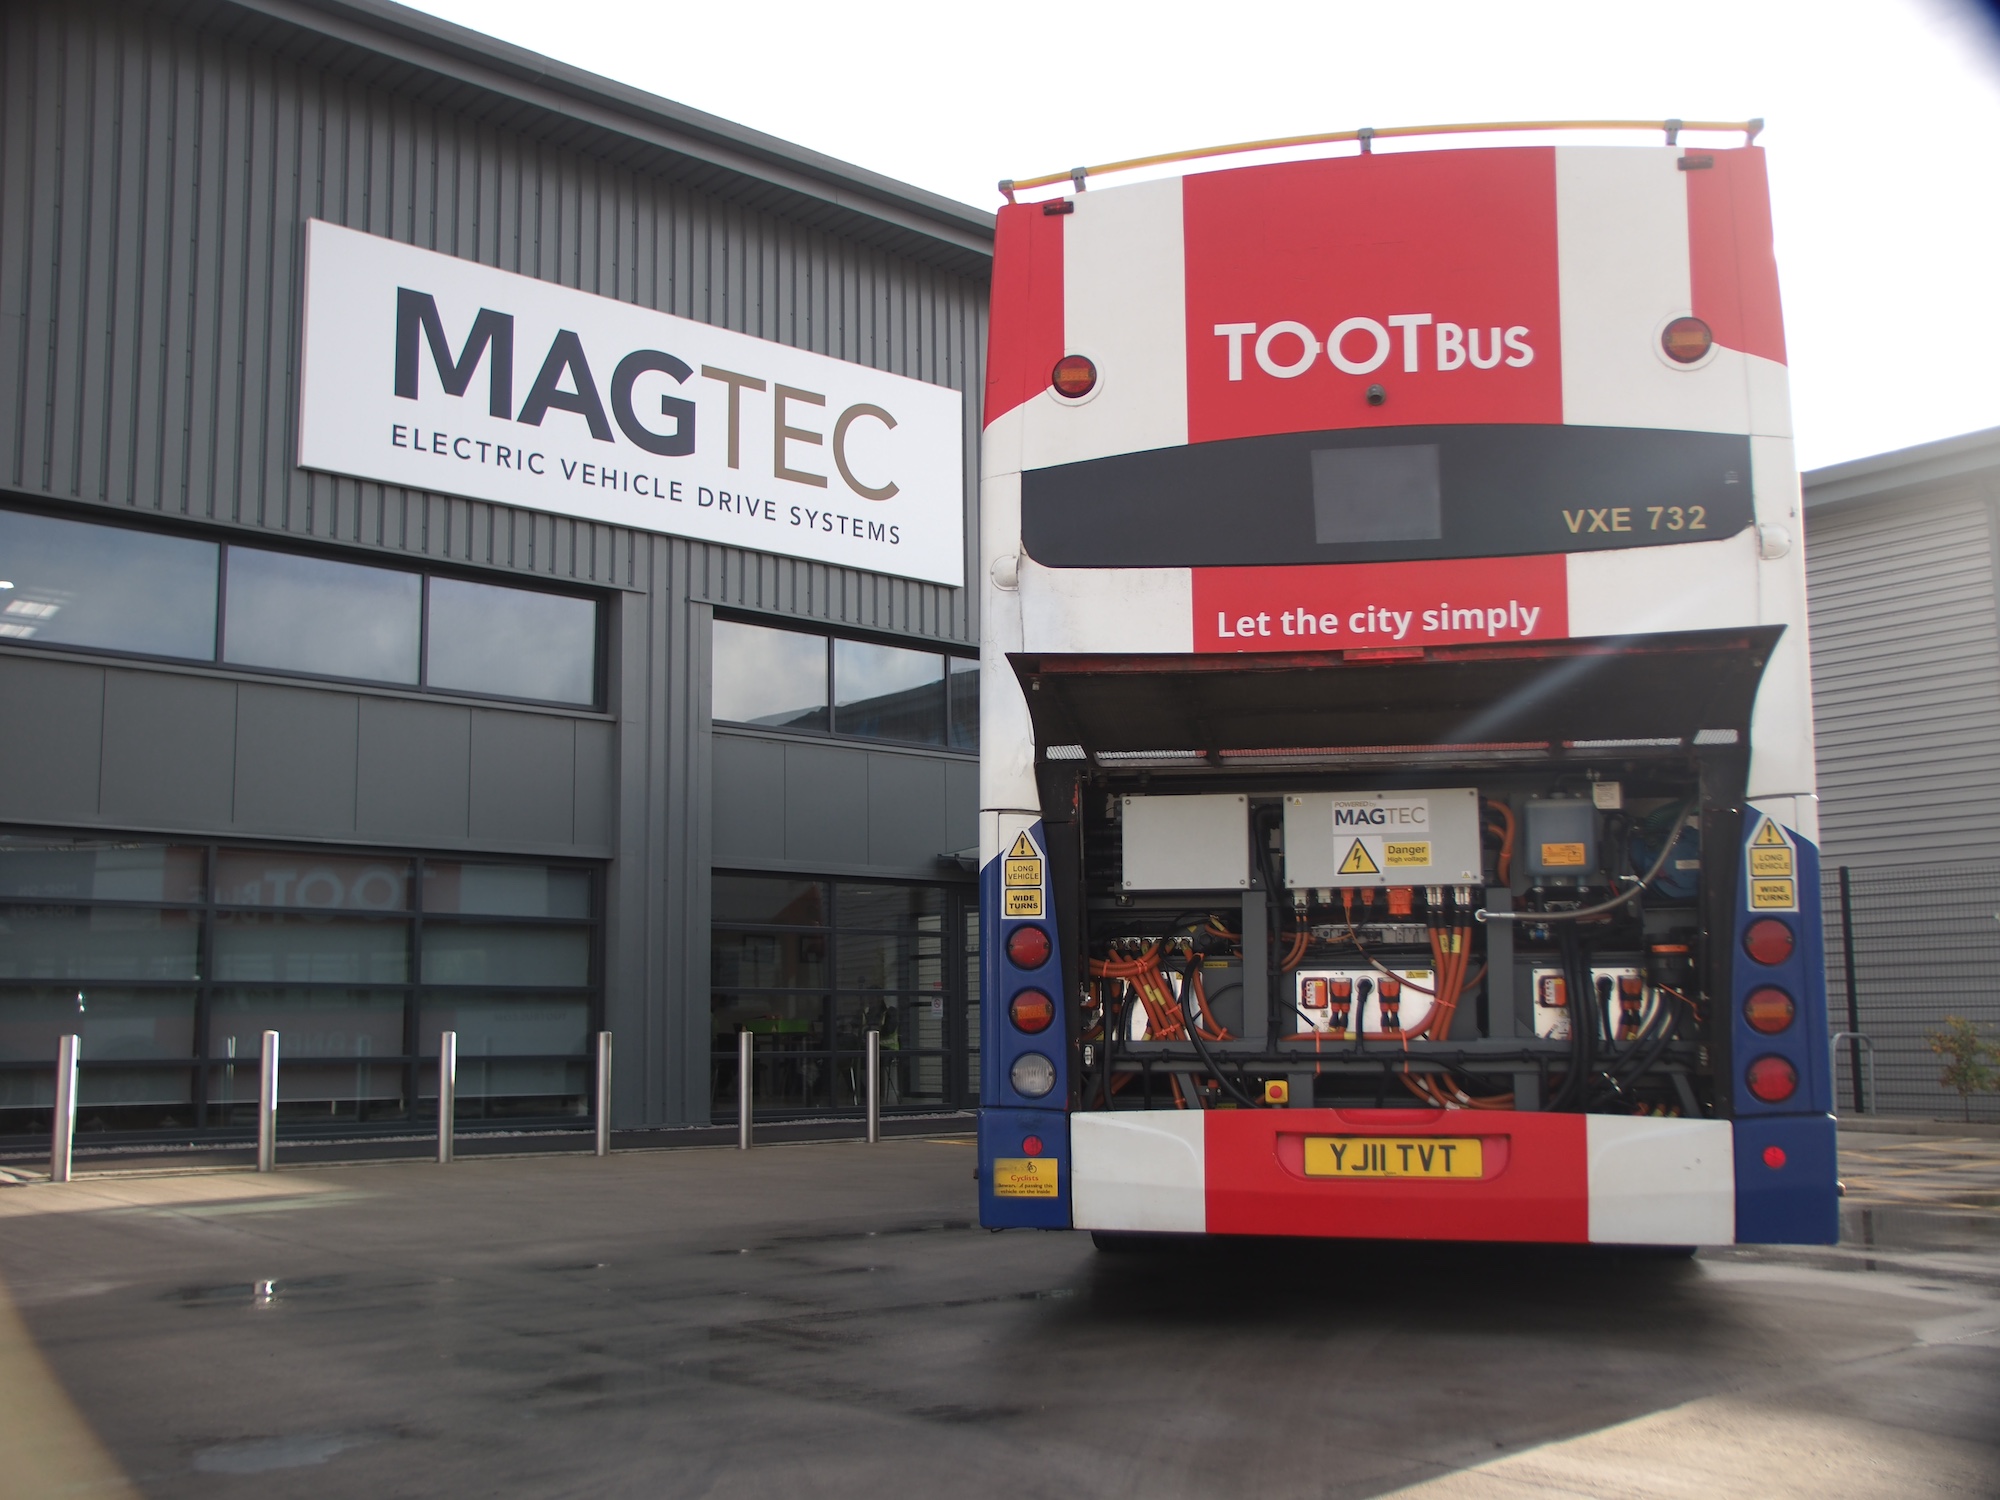 Tootbus using Magtec to repower 15 sightseeing buses